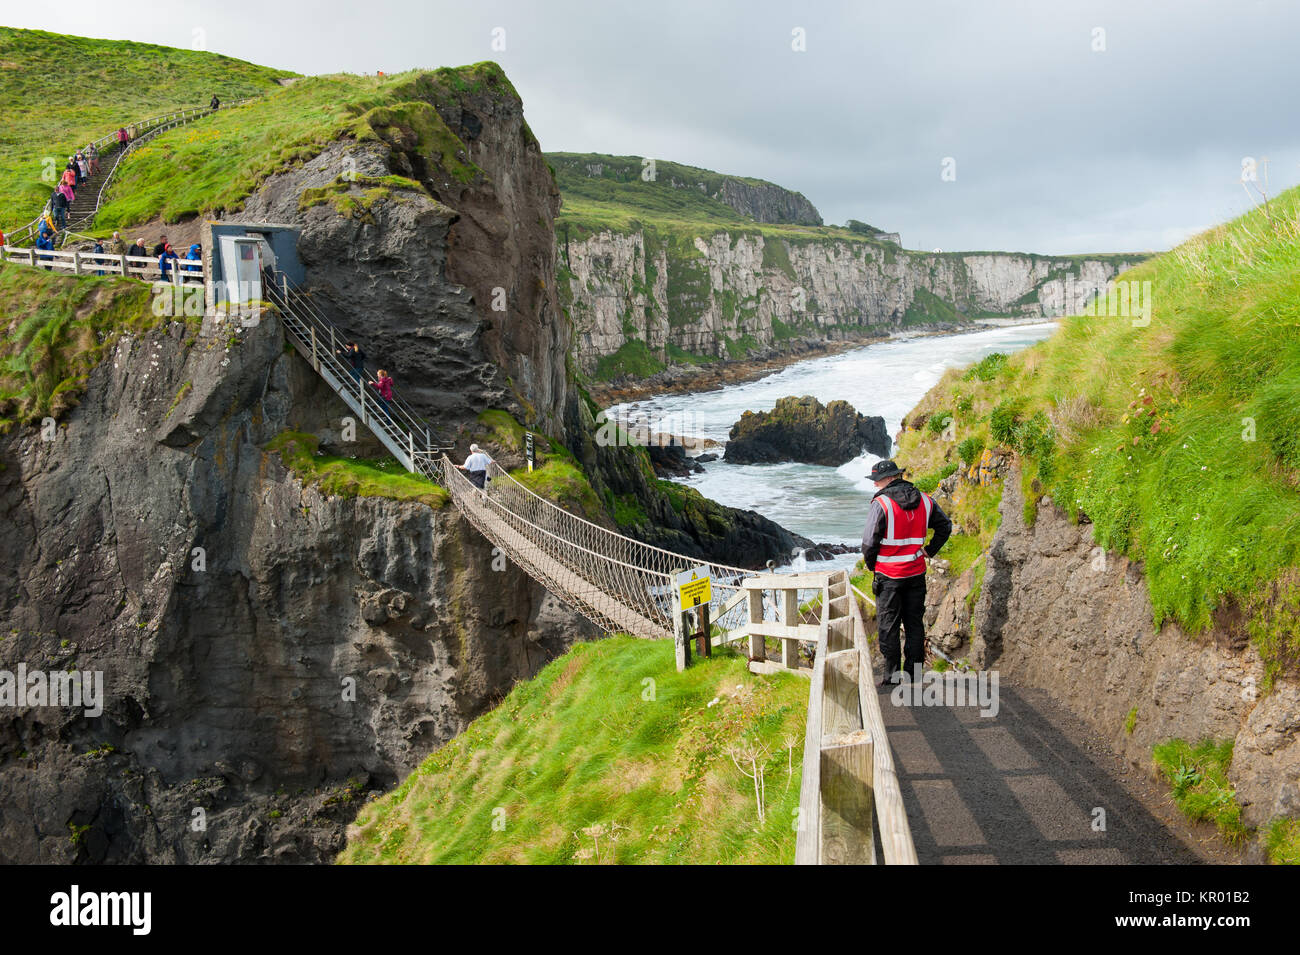 Ballycastle, Northern Ireland, UK - September 2017: People crossing the Carrick-a-Rede Rope Bridge, a famous tourist attraction in Ballycastle, Northe Stock Photo